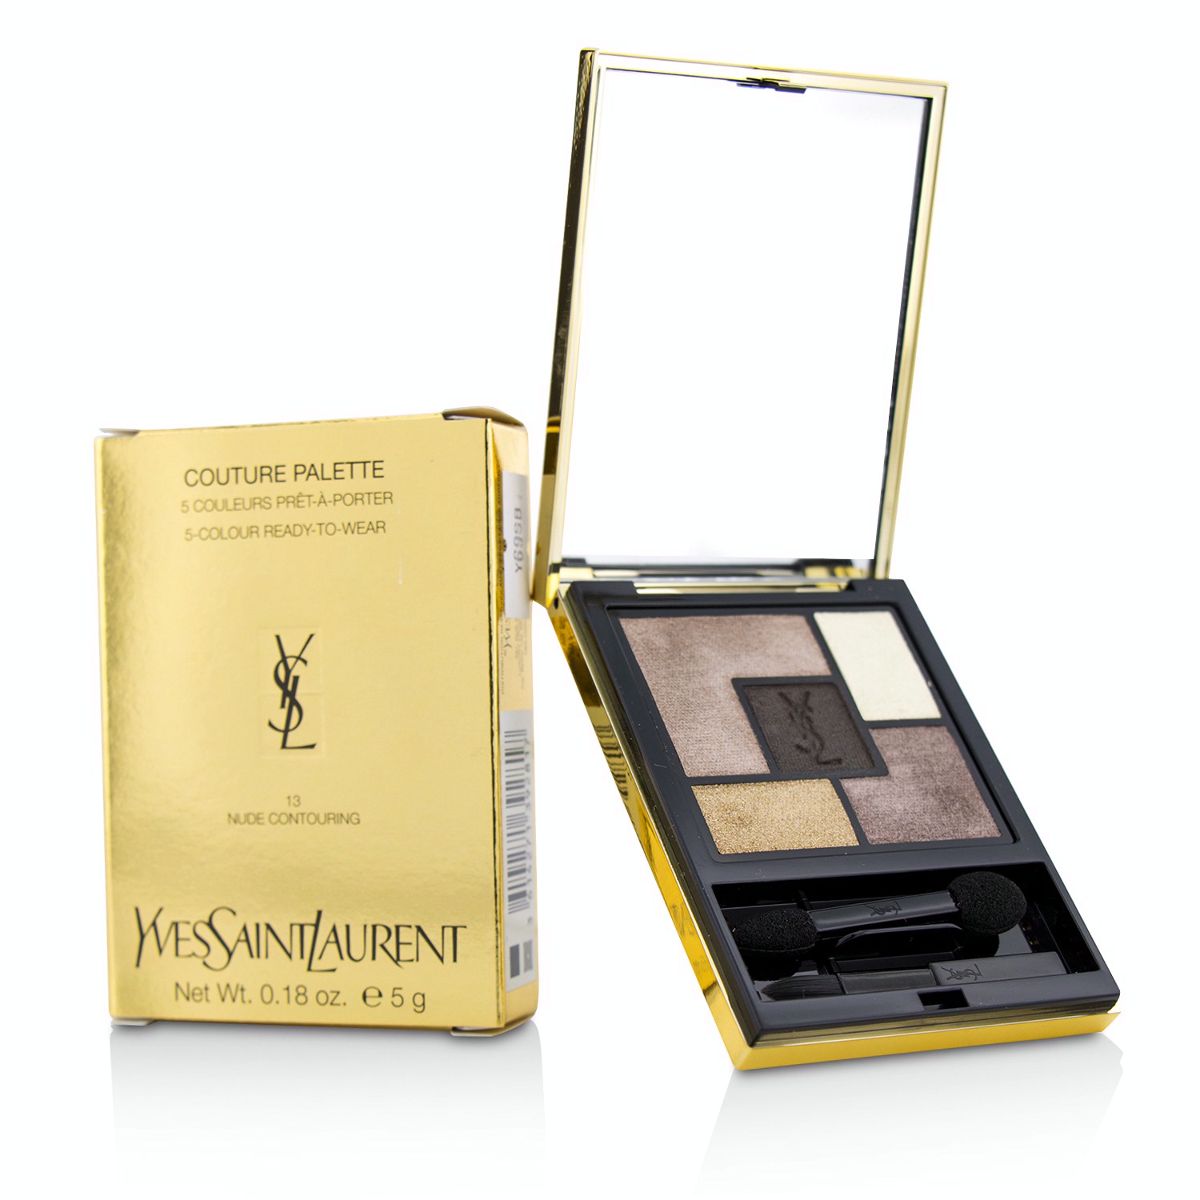 Couture Palette (5 Color Ready To Wear) #13 (Nude Contouring) Yves Saint Laurent Image